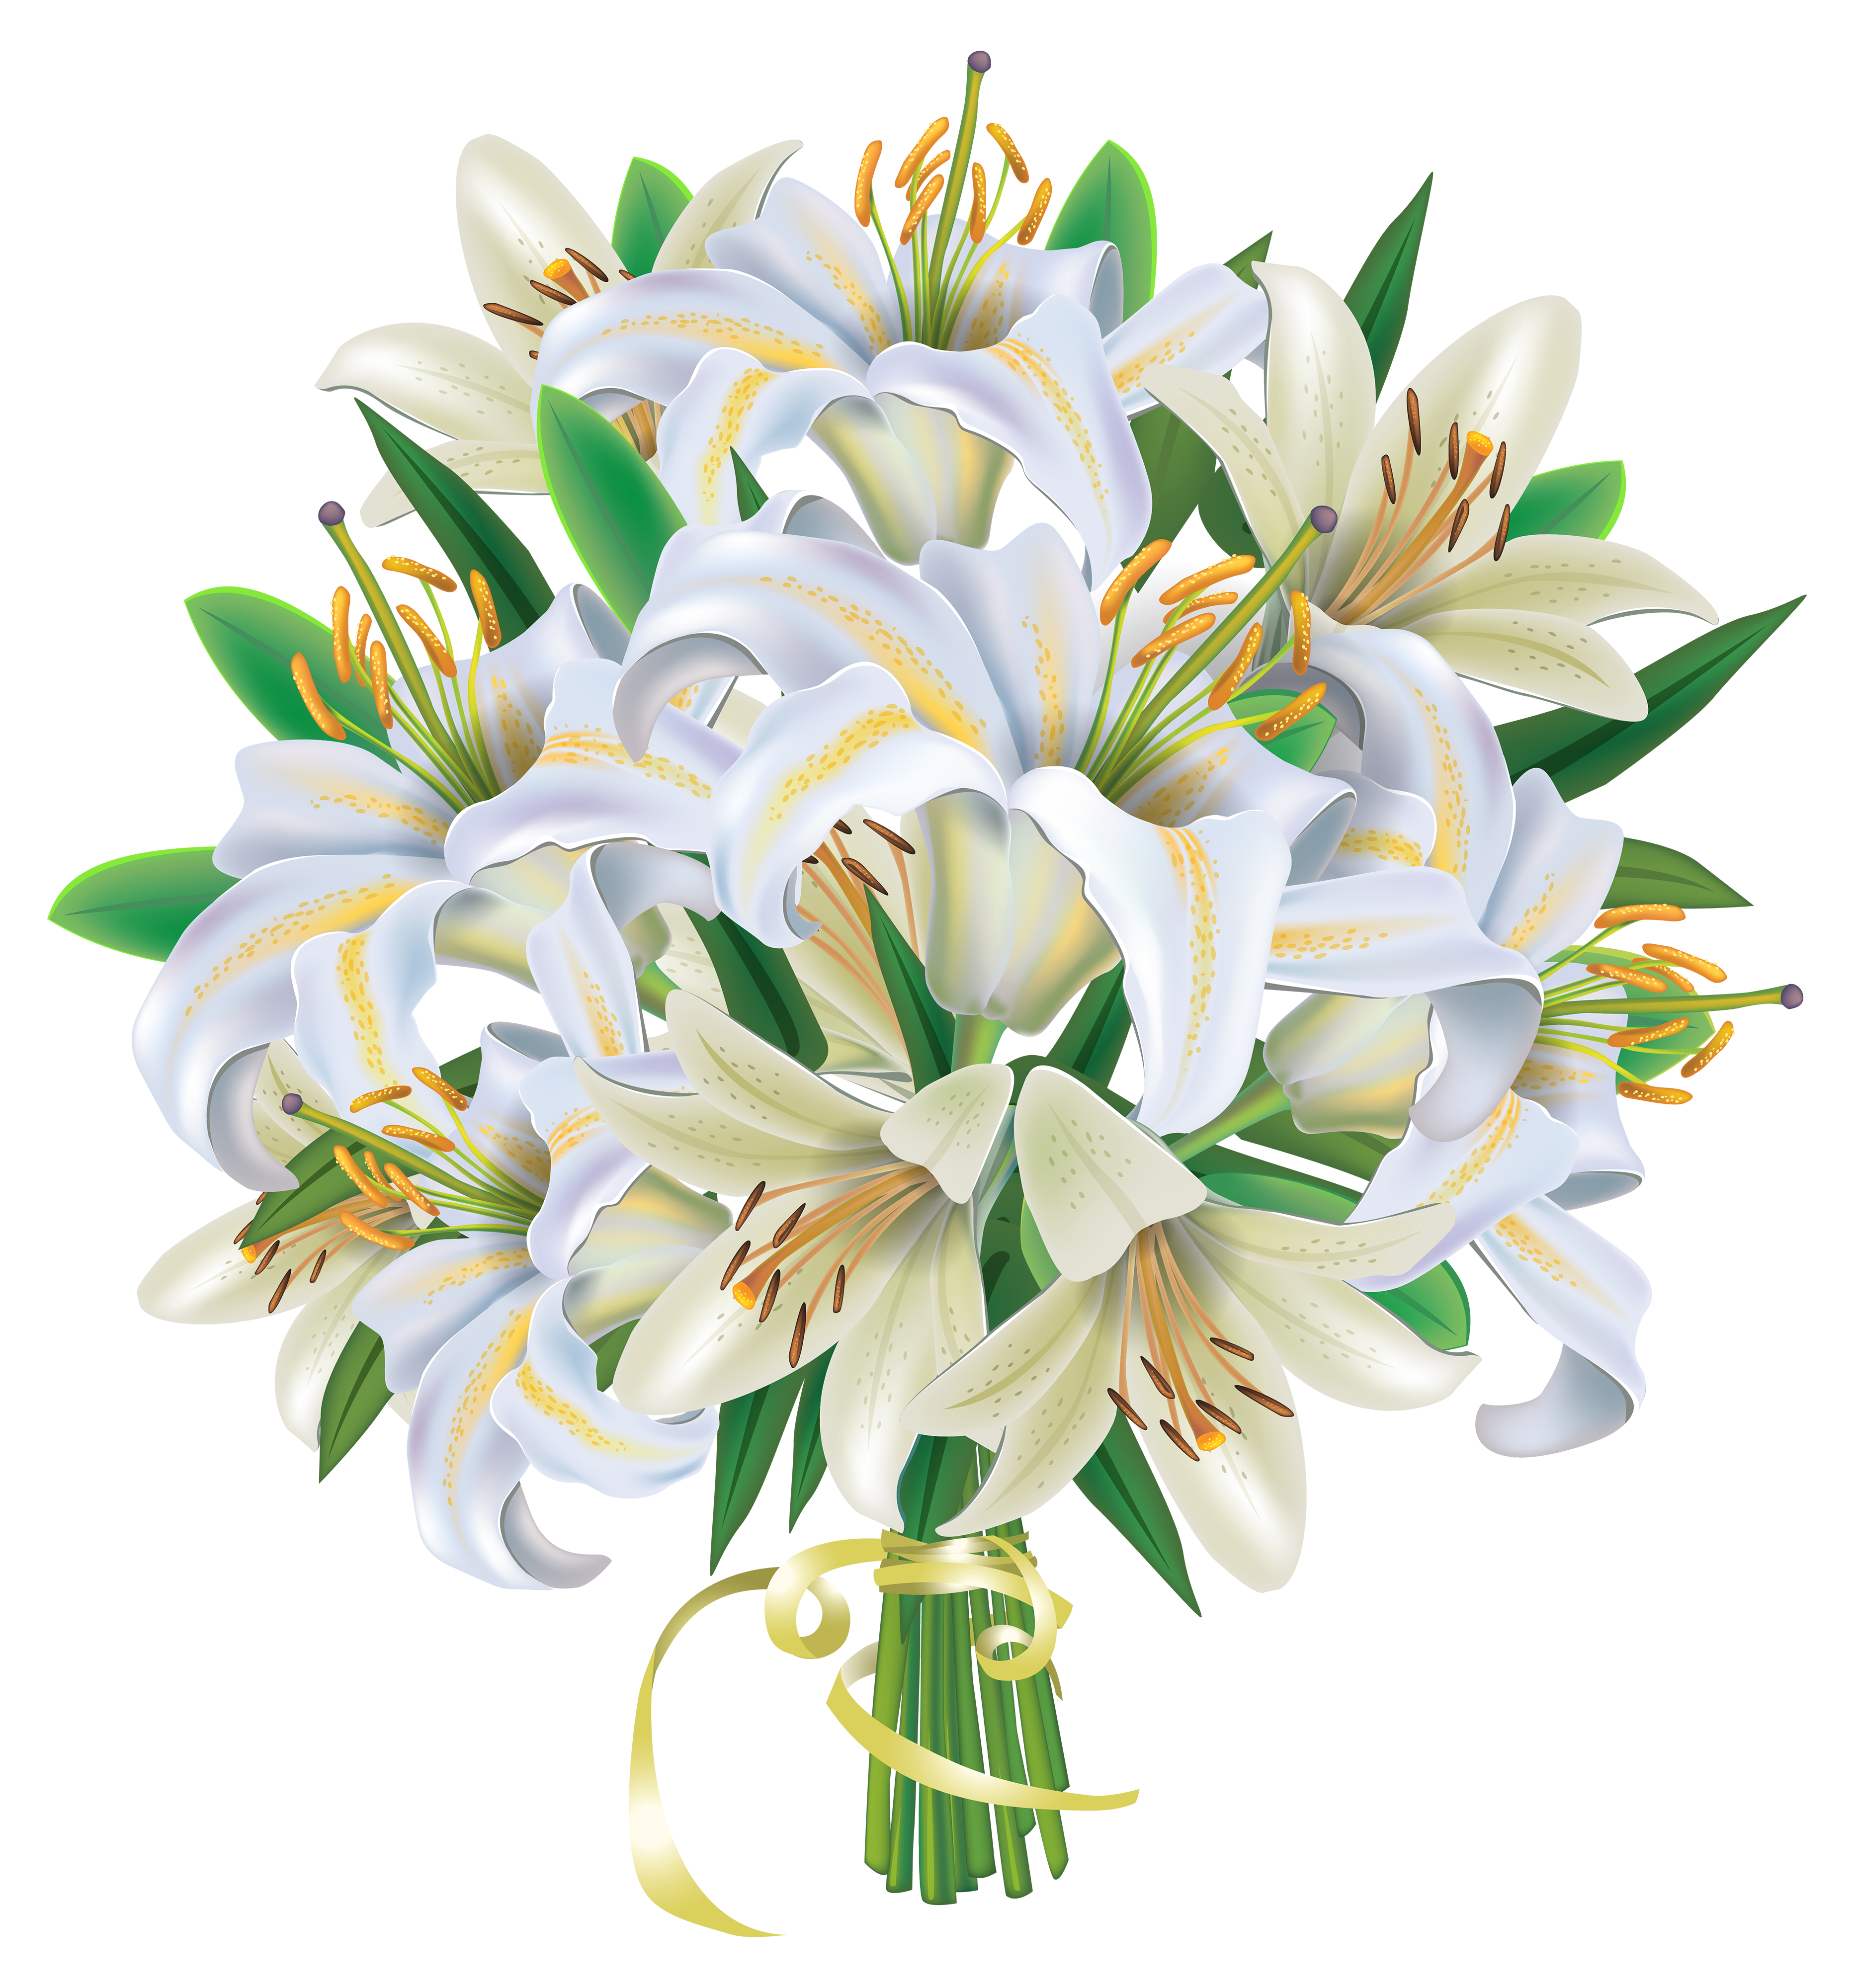 White Lilies Flowers Bouquet PNG Clipart Image | Gallery ...